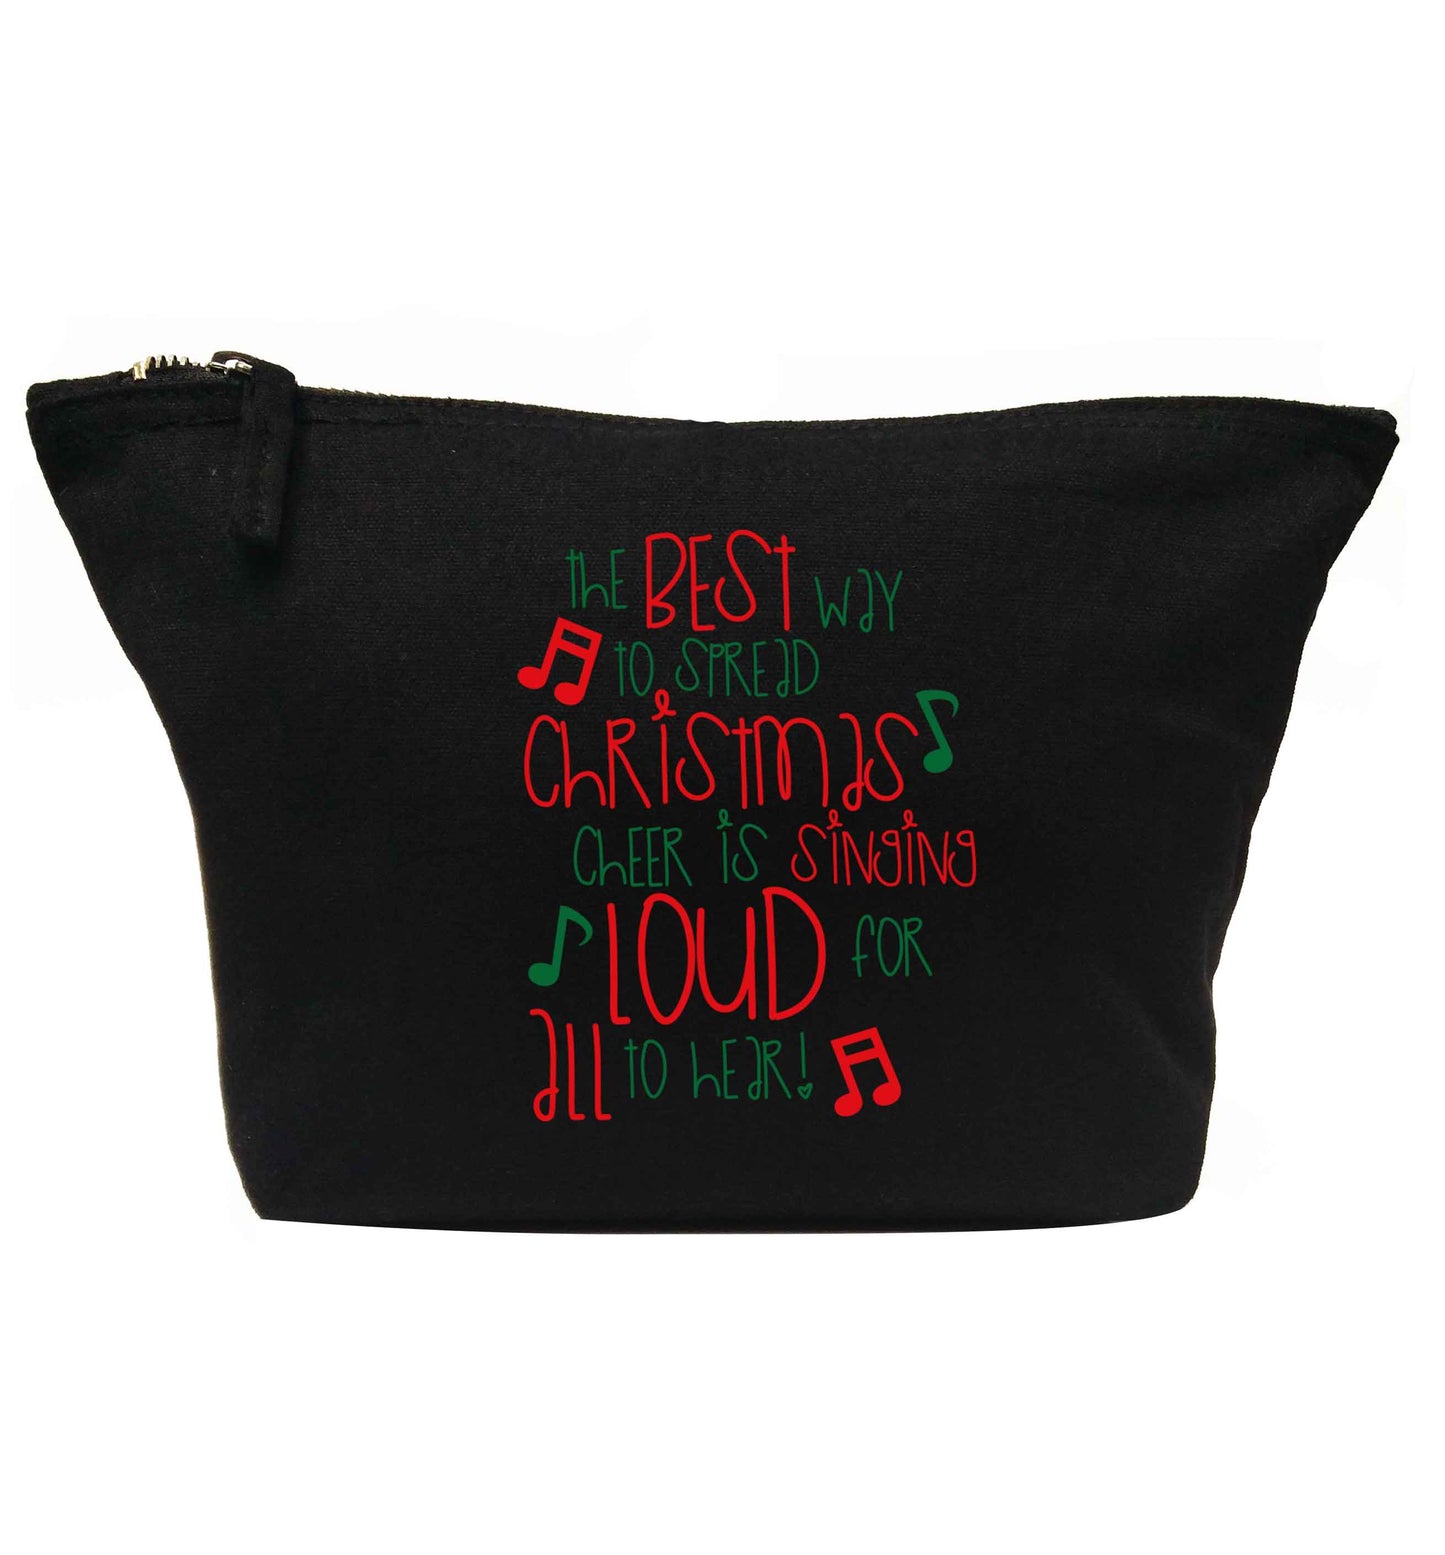 The best way to spread Christmas cheer is singing loud for all to hear | Makeup / wash bag